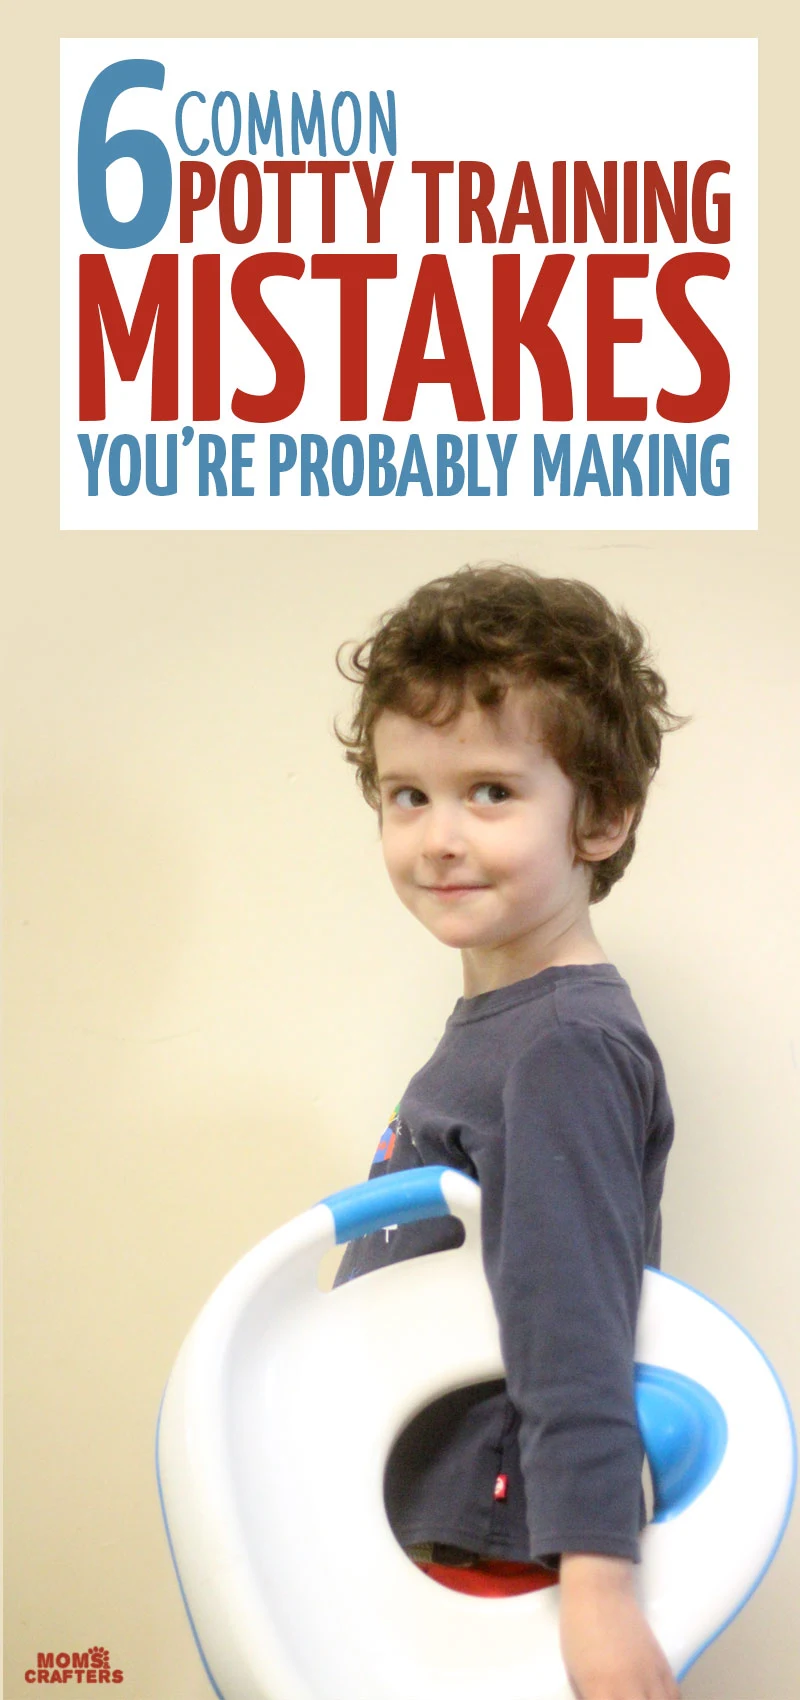 If you've tried everything with potty training your toddler or preschooler, you've followed all the potty training tips, and you're stuck, you may be making some common potty training mistakes. I made many of these mistakes and decided to open up and share them with fellow parents who are struggling to toilet train a three year old. These parenting tips apply to potty training boys and girls!